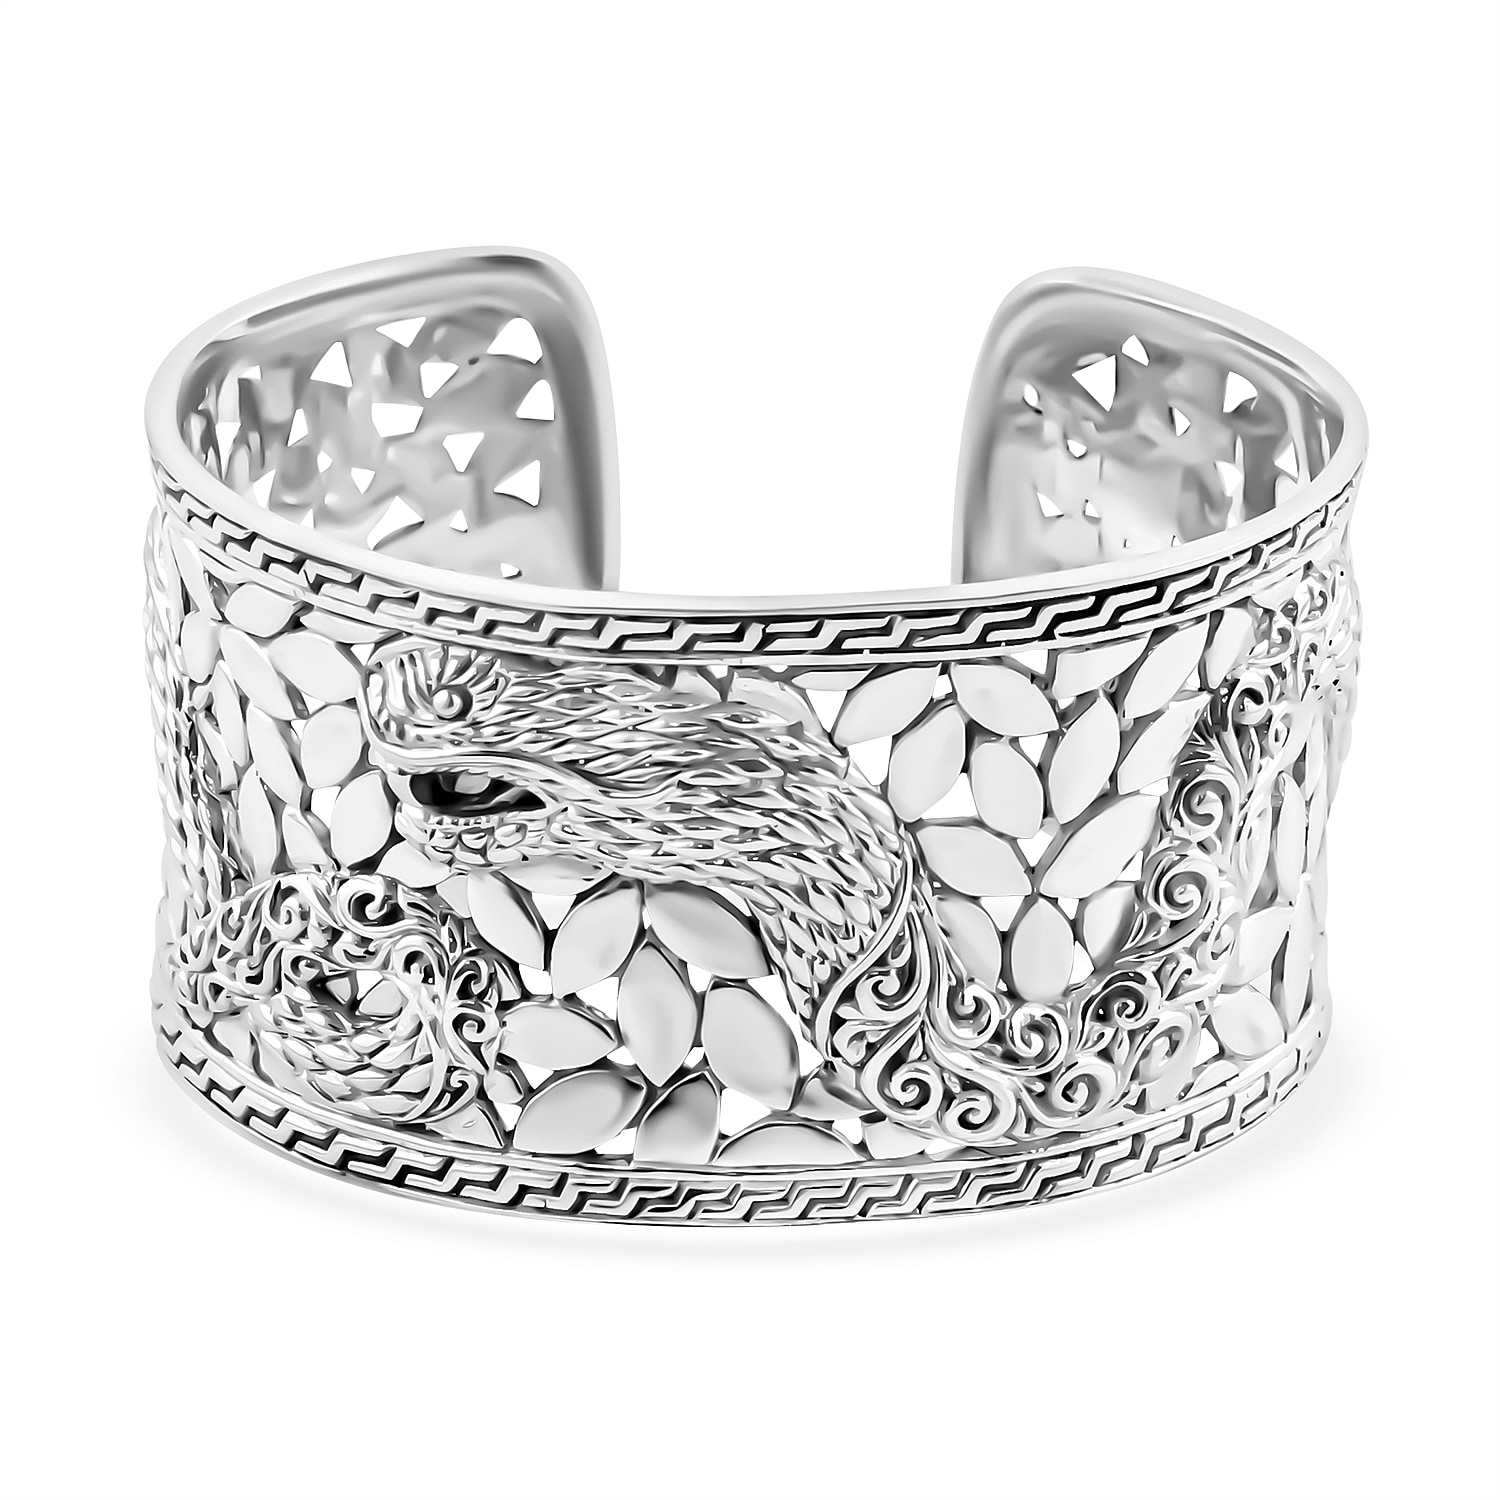 Royal Bali Collection-Sterling Silver Snake Wide Cuff Bangle (Size 7.5), Silver Wt. 64.00Gms